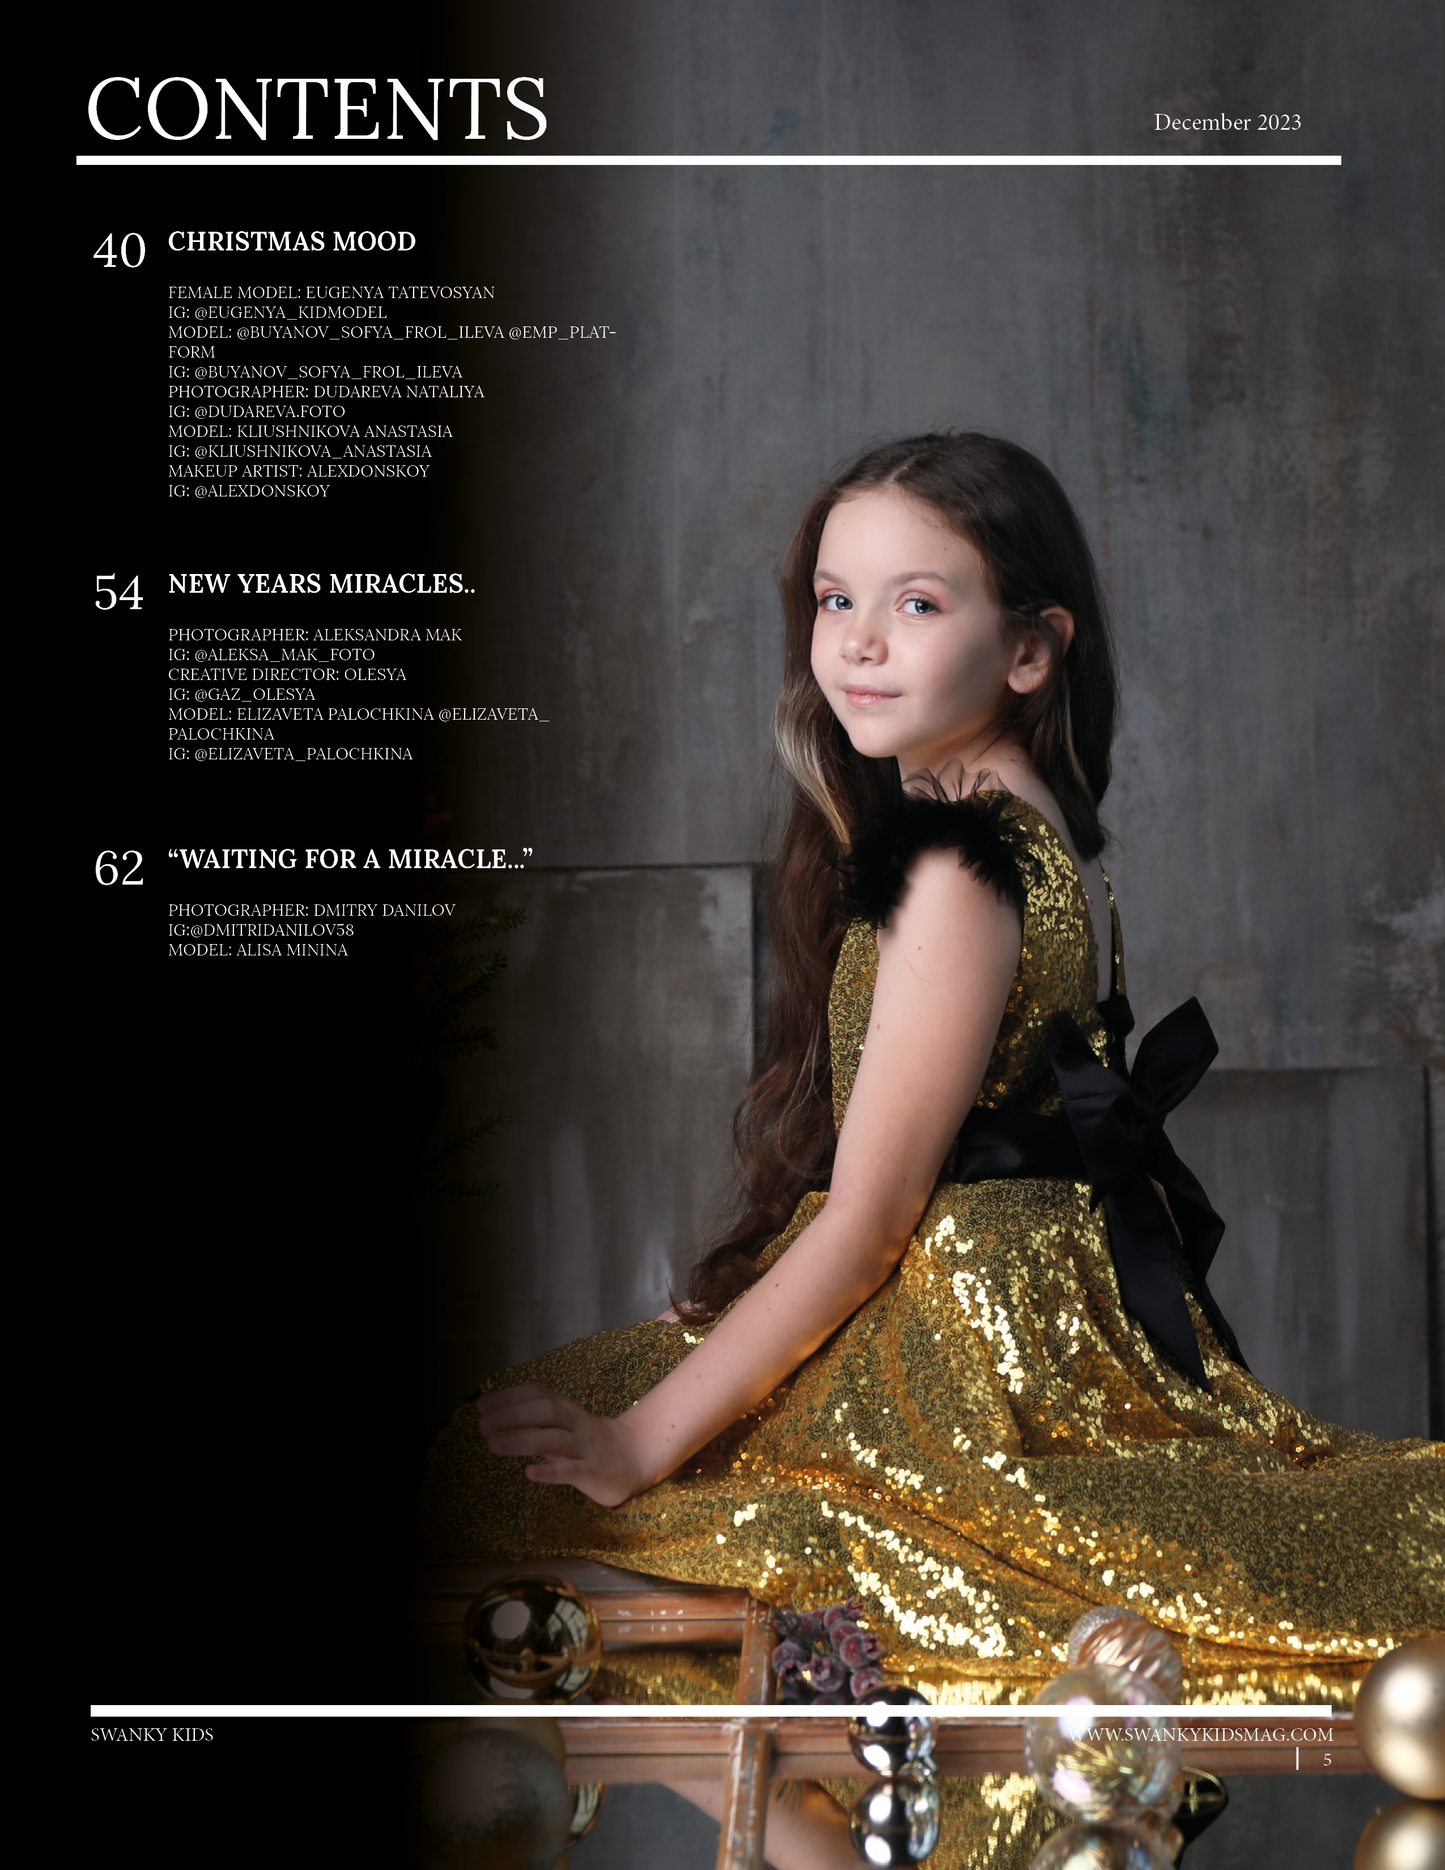 Swanky Kids Magazine - December 2023: The Swanky Kids Edition The Luxe Issue III